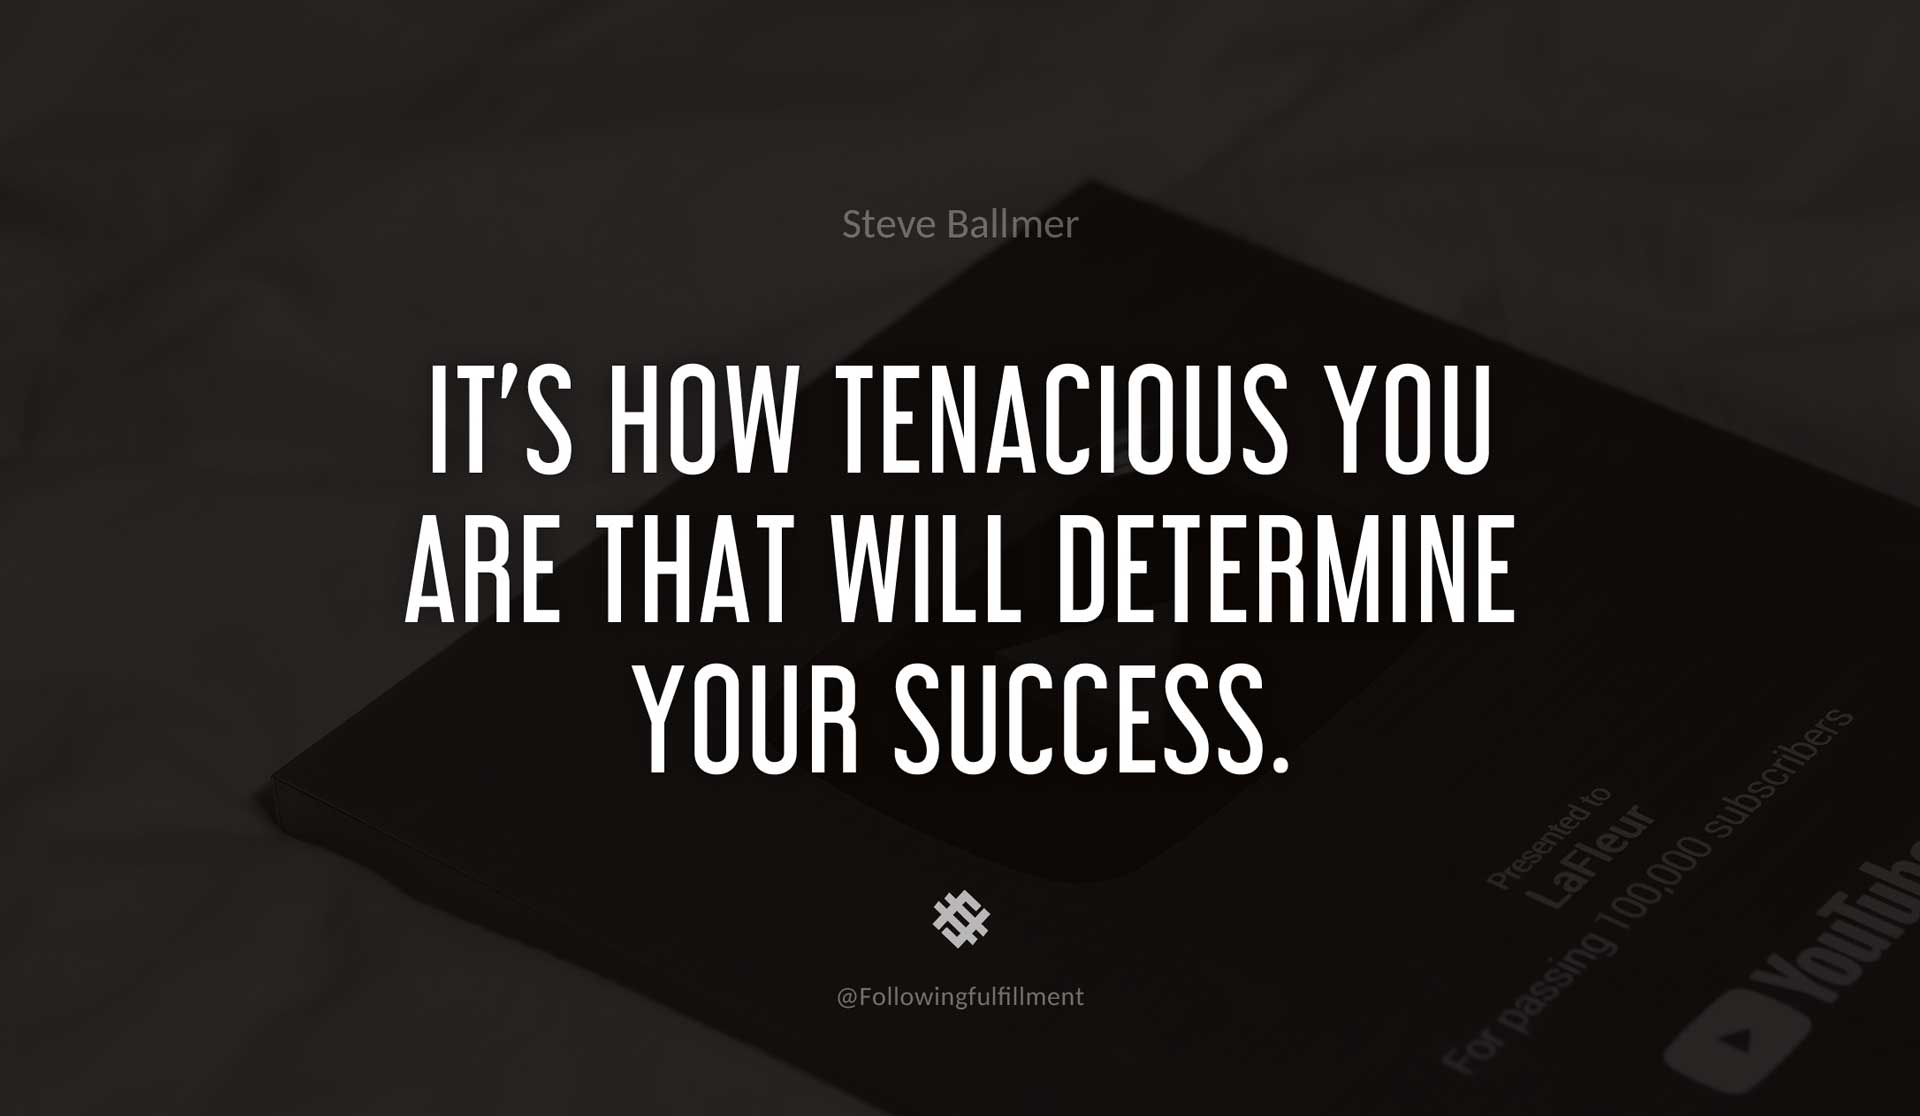 It's-how-tenacious-you-are-that-will-determine-your-success.-STEVE-BALLMER-Quote.jpg